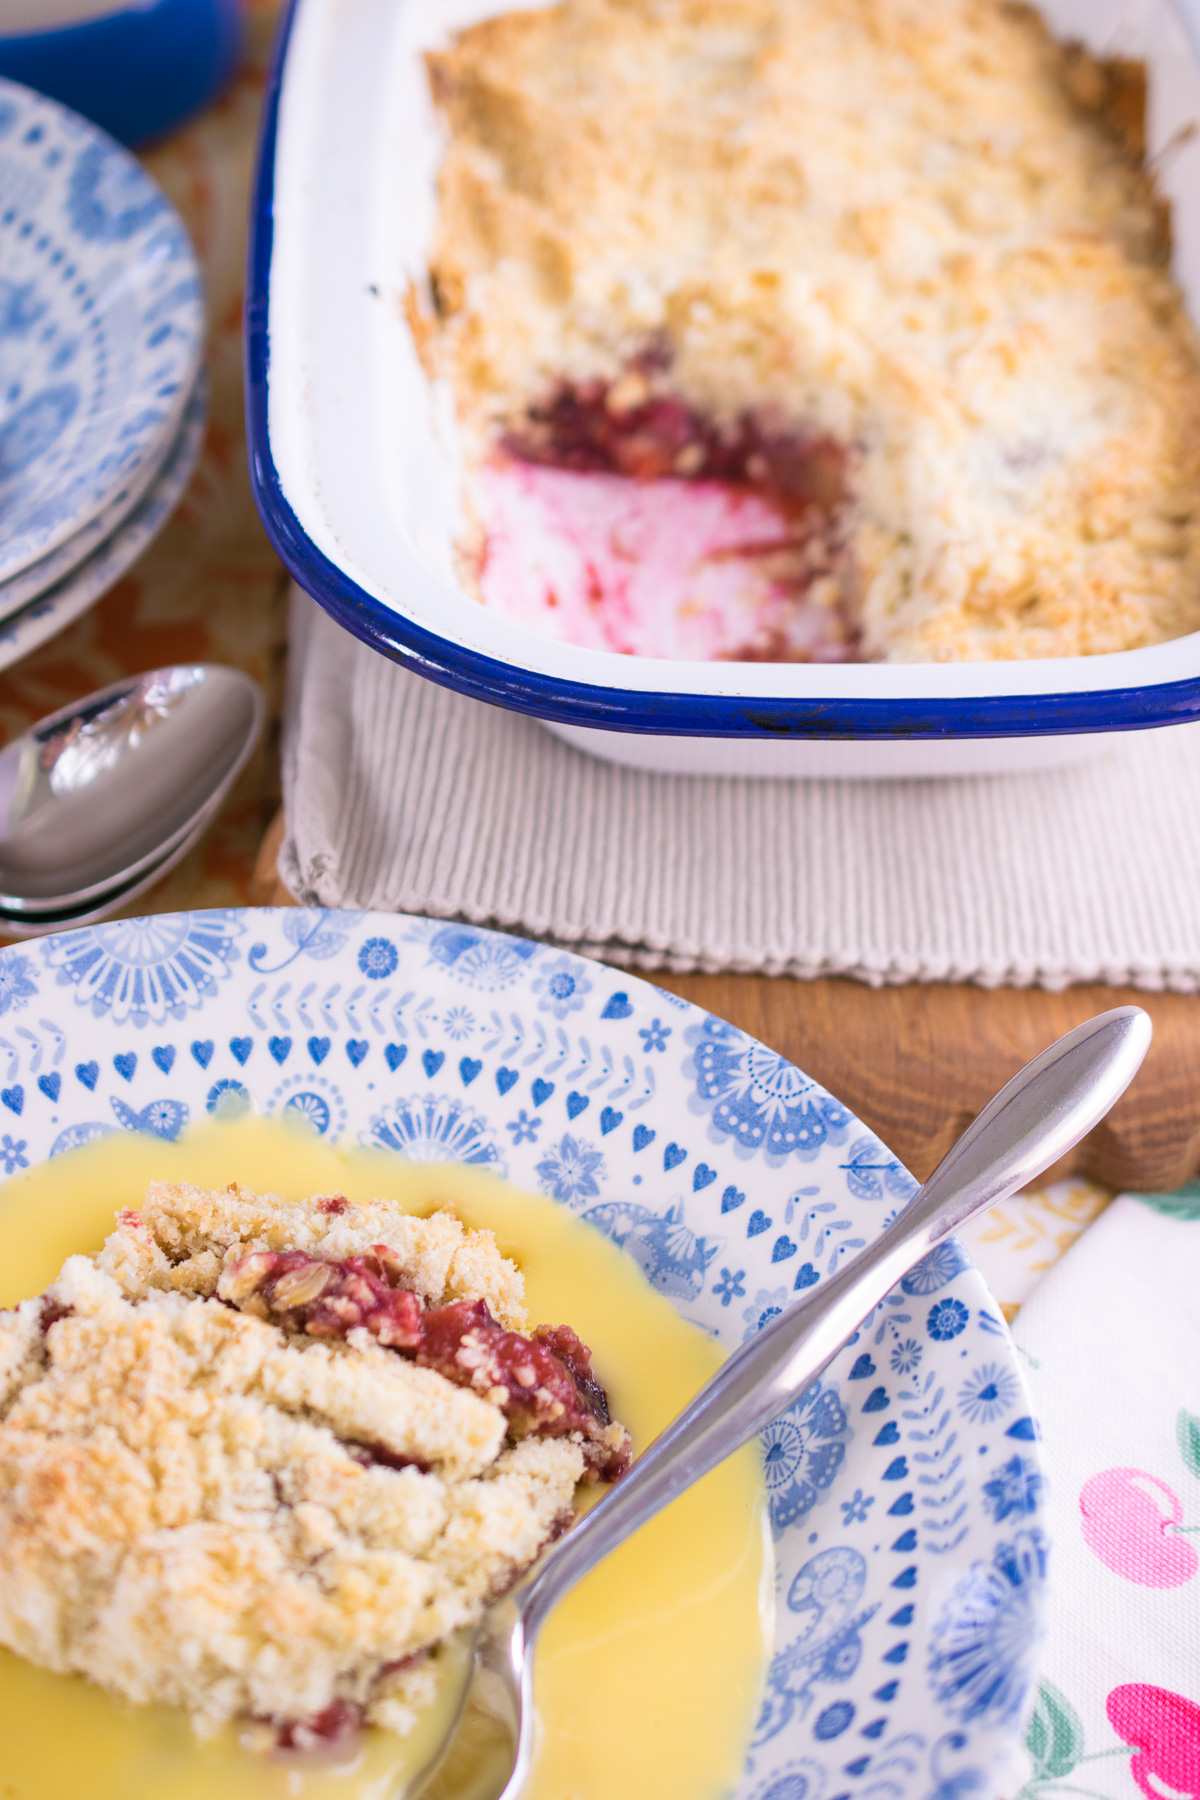 Plumble - adorable name for this delicious plum crumble!